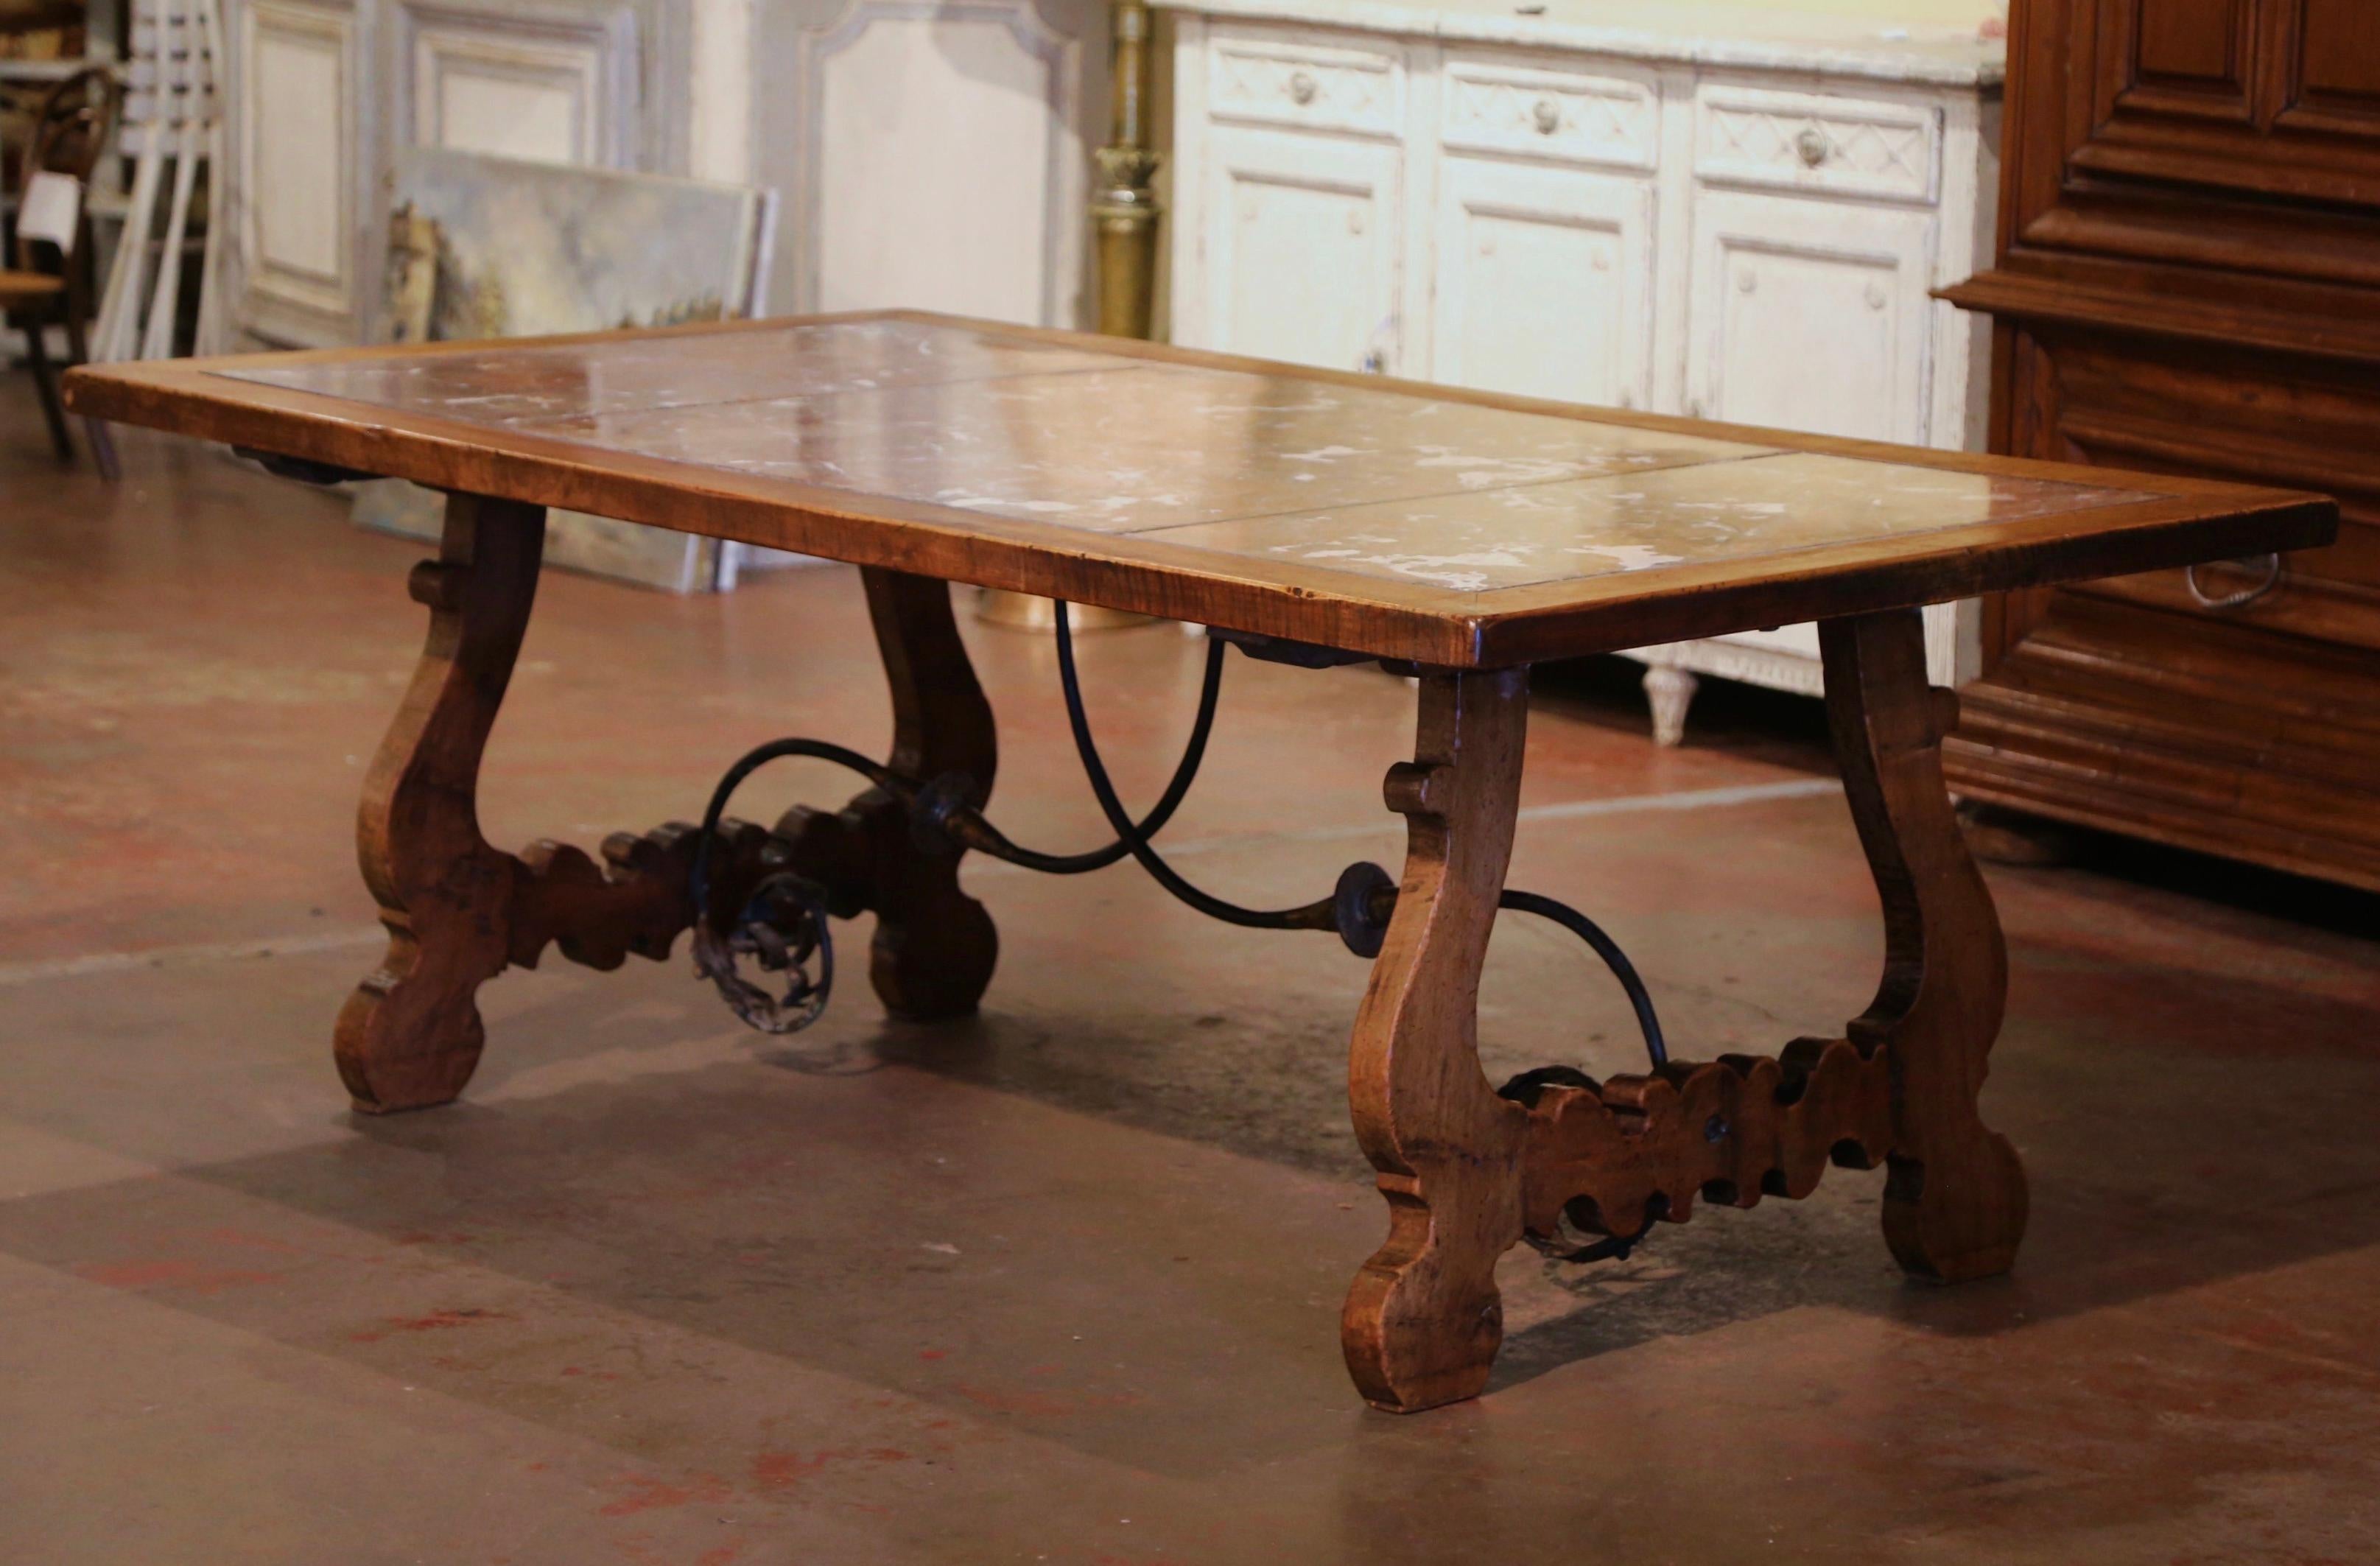 Decorate a dining or breakfast room with this elegant antique table. Carved in Spain circa 1870, the large trestle table stands on two intricate carved legs, connected with a thick scrolled forged foliate iron stretcher. The top is dressed with